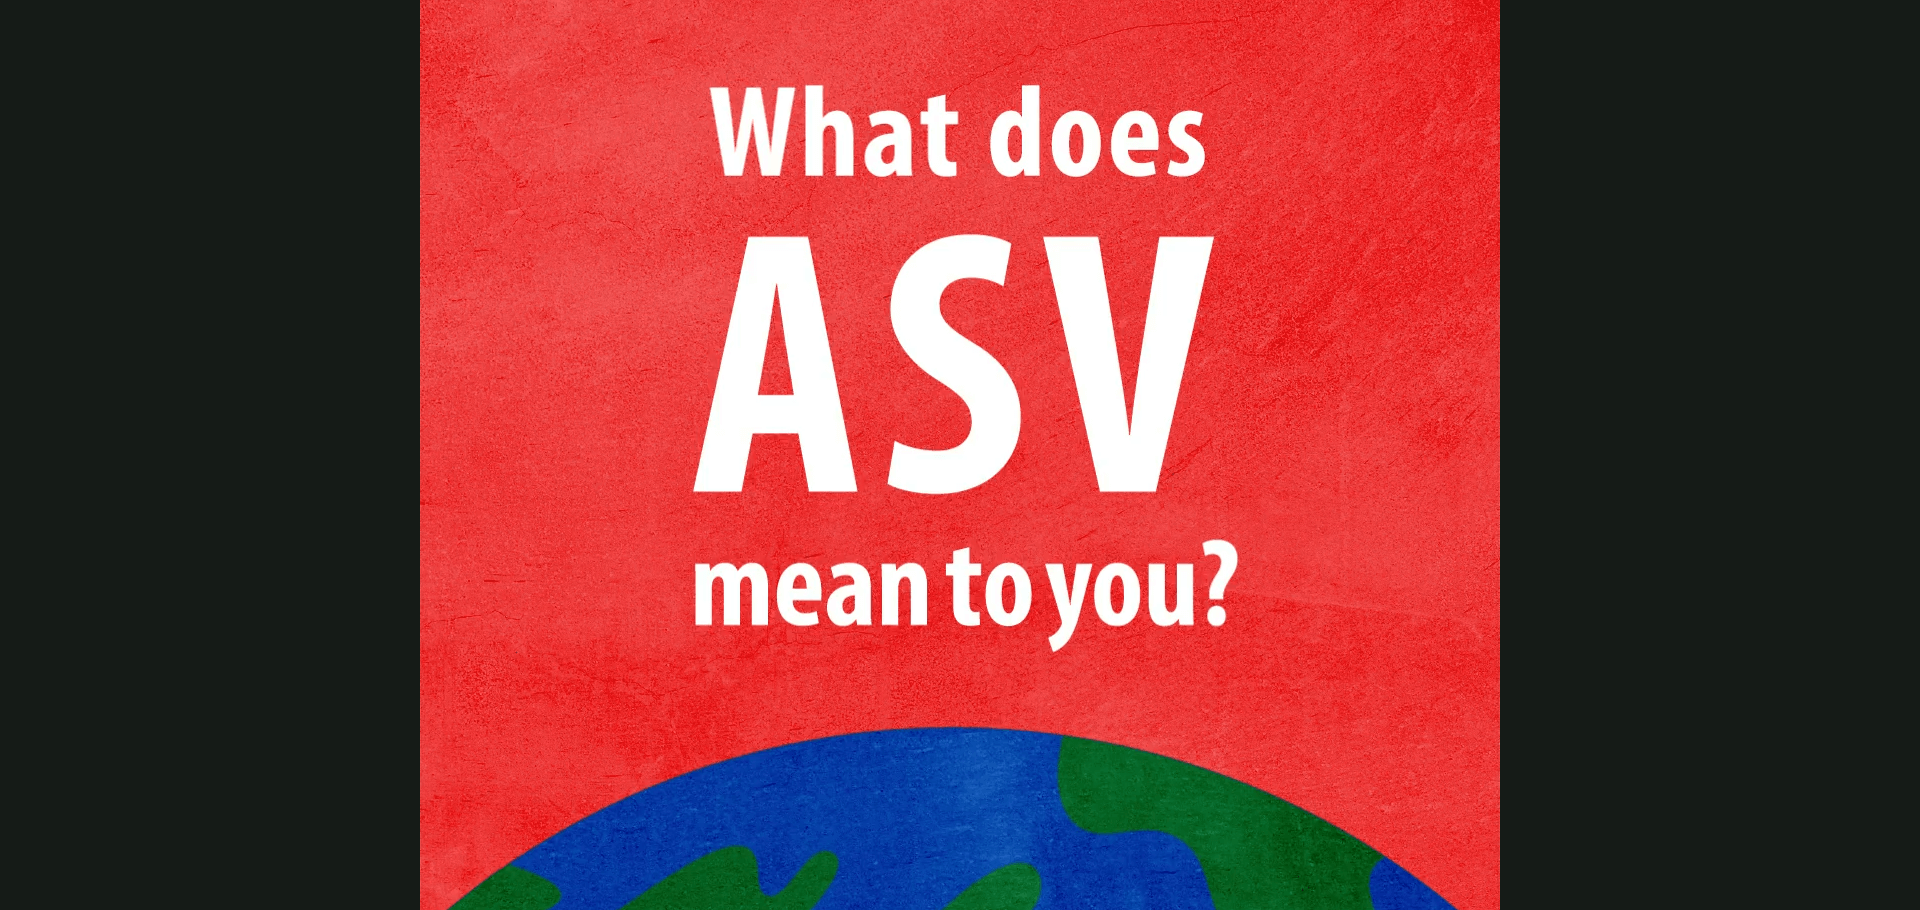 what does ASV mean to you?